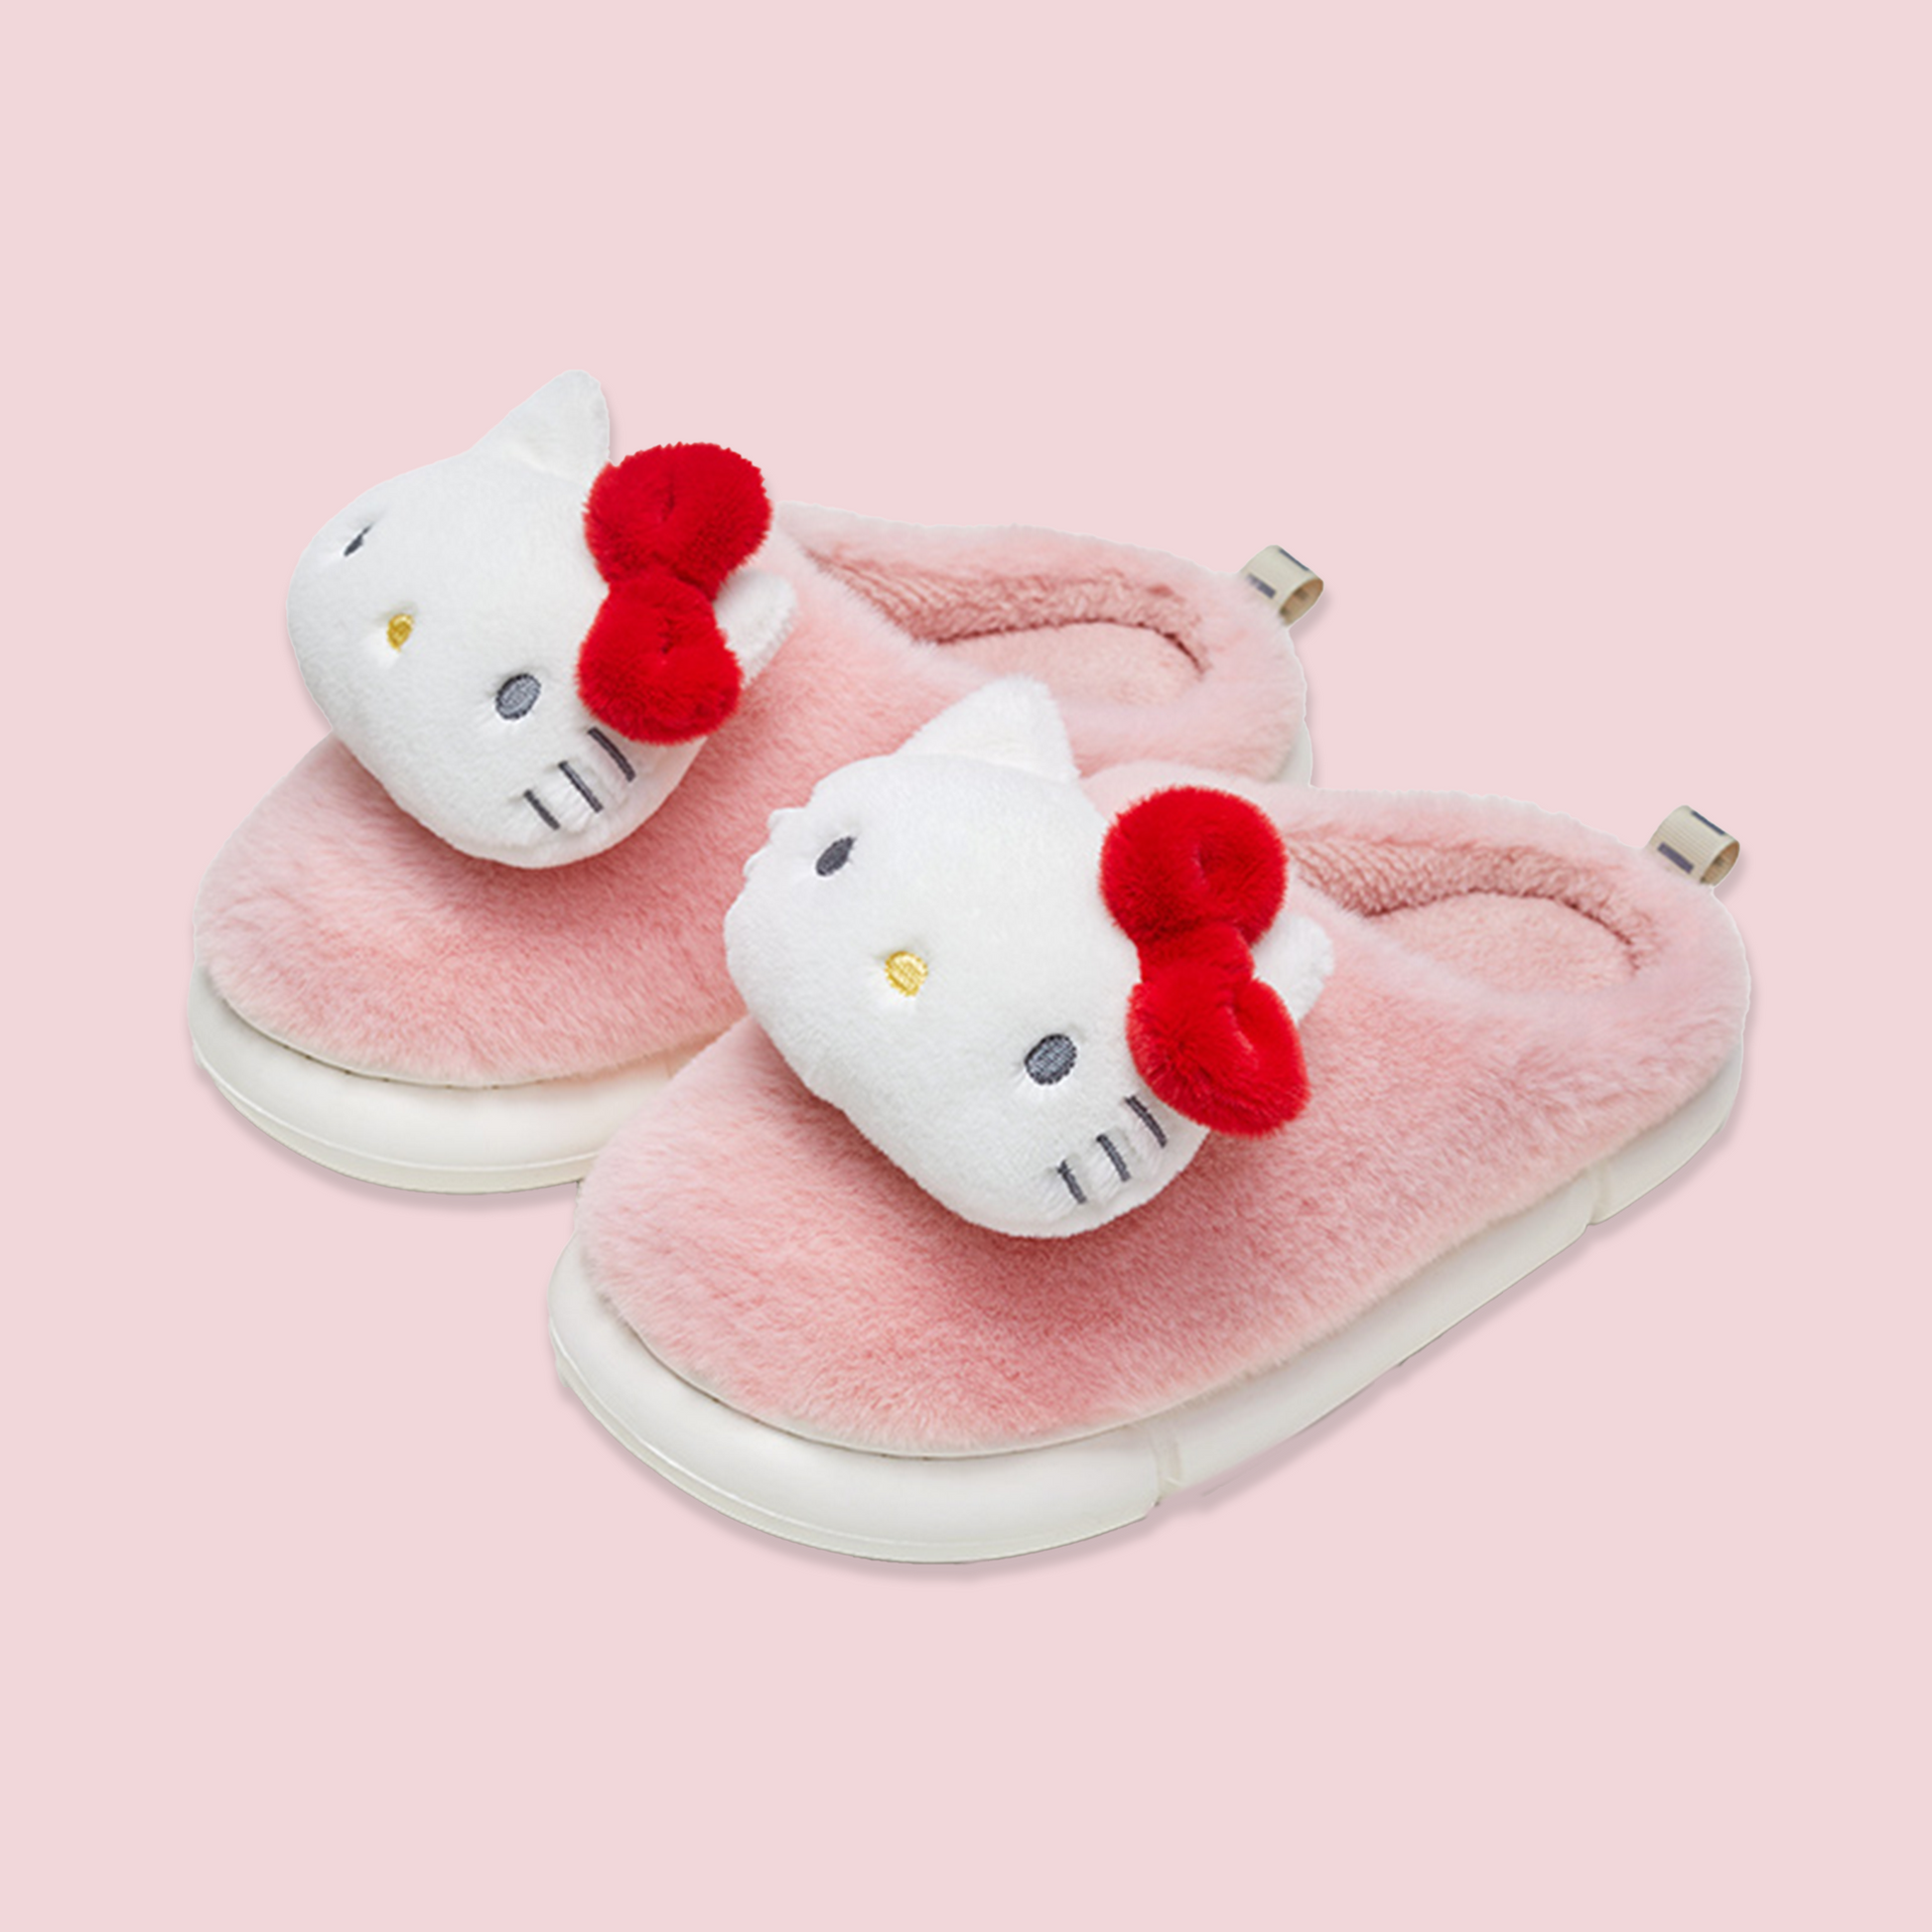 Utune x Sanrio - Fluff Kuromi & My Melody Winter Slippers | Moonguland 230 (W4.5-5.5| EU 34-35) / Kuromi / Verify with Our Size Guide (Sizes Based on